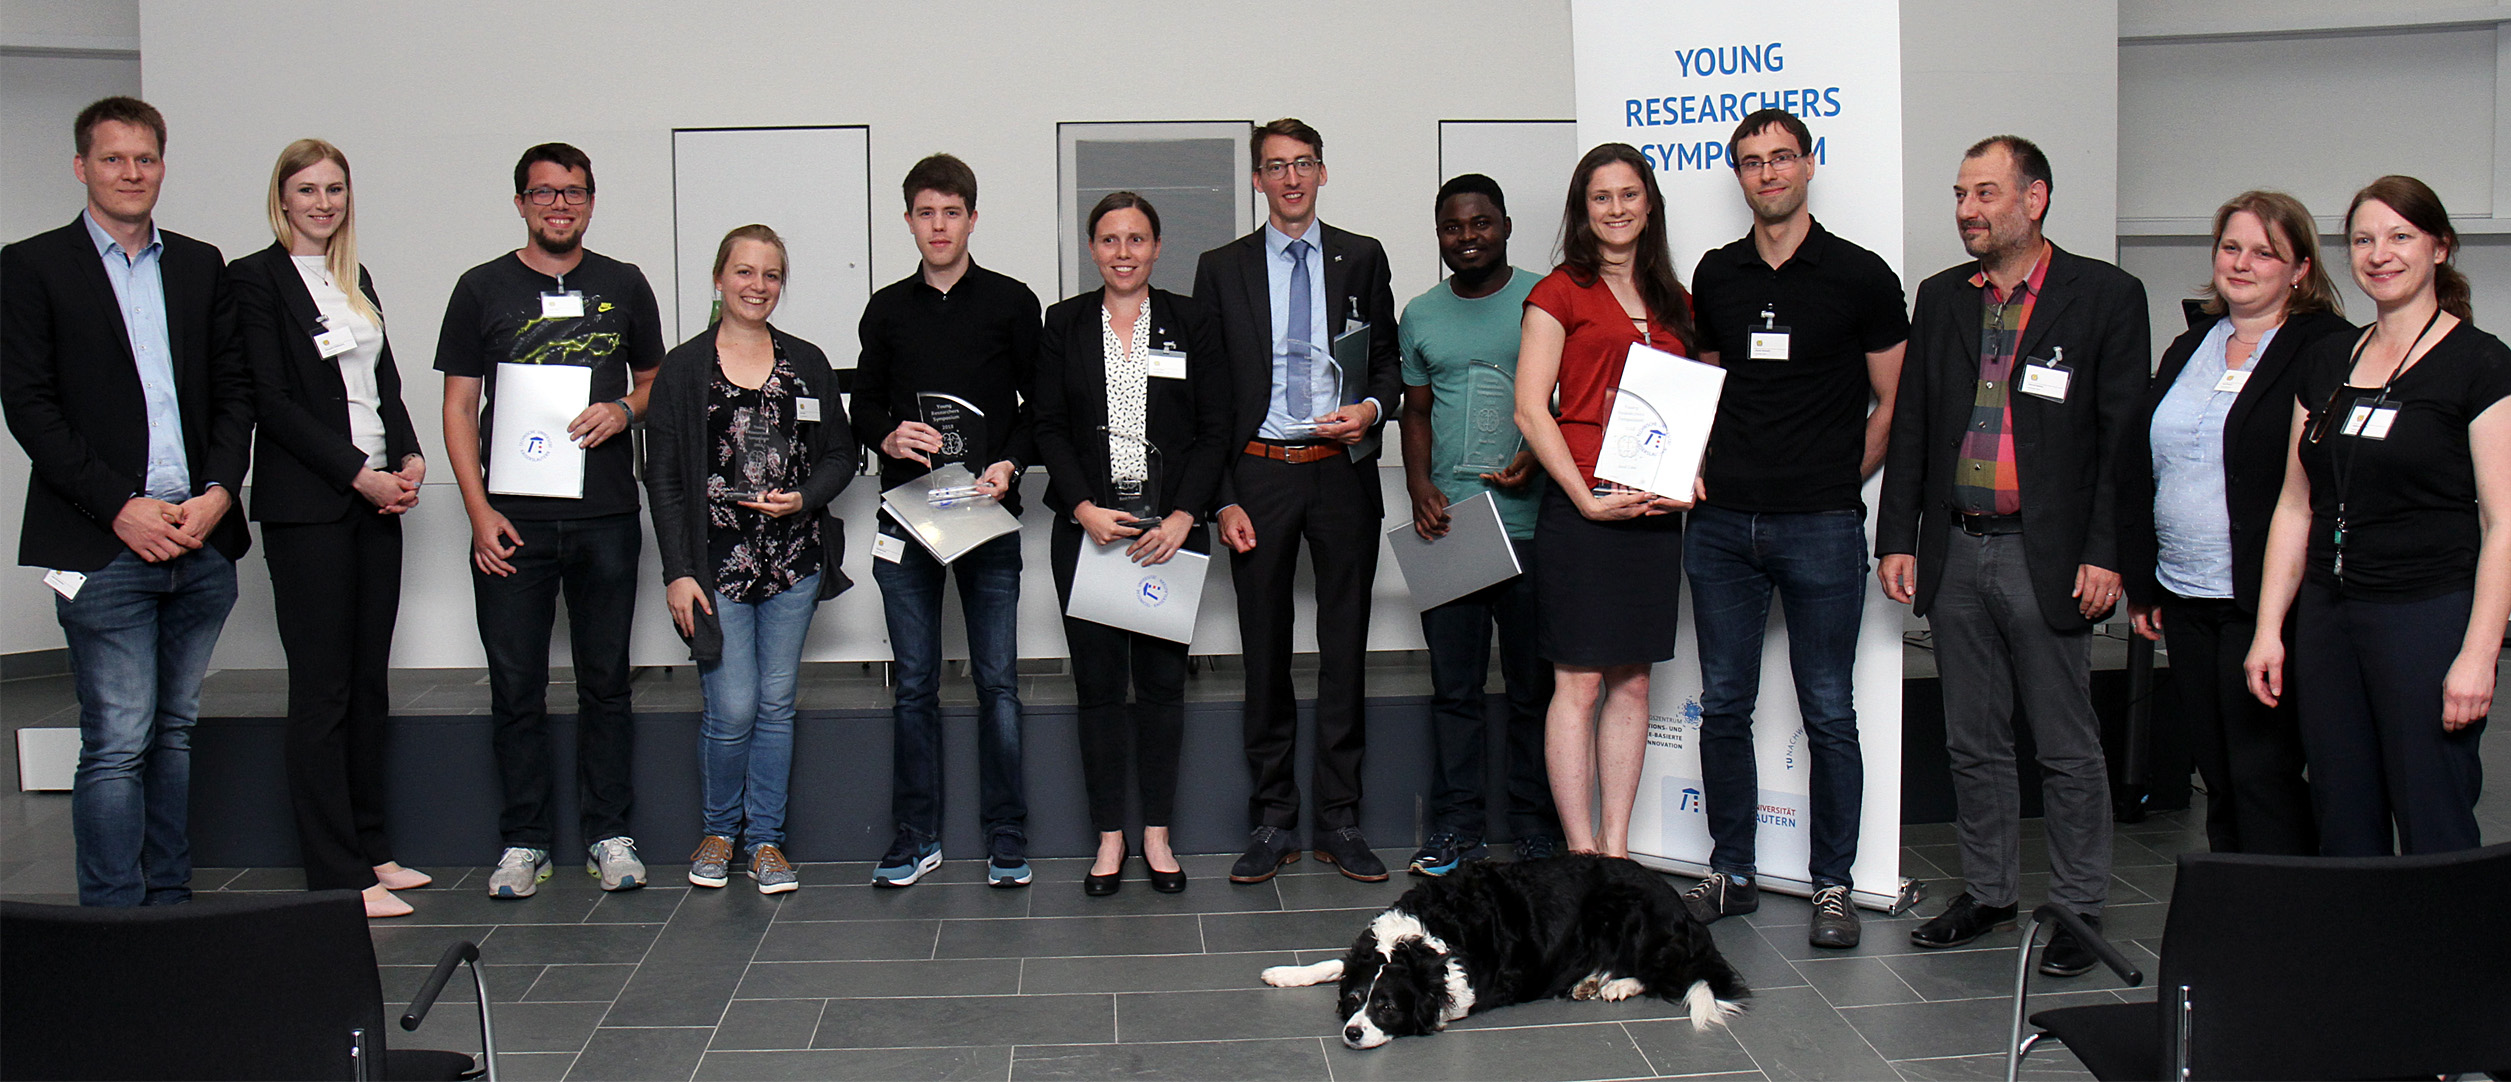 Gruppenbild Young Researchers Symposium